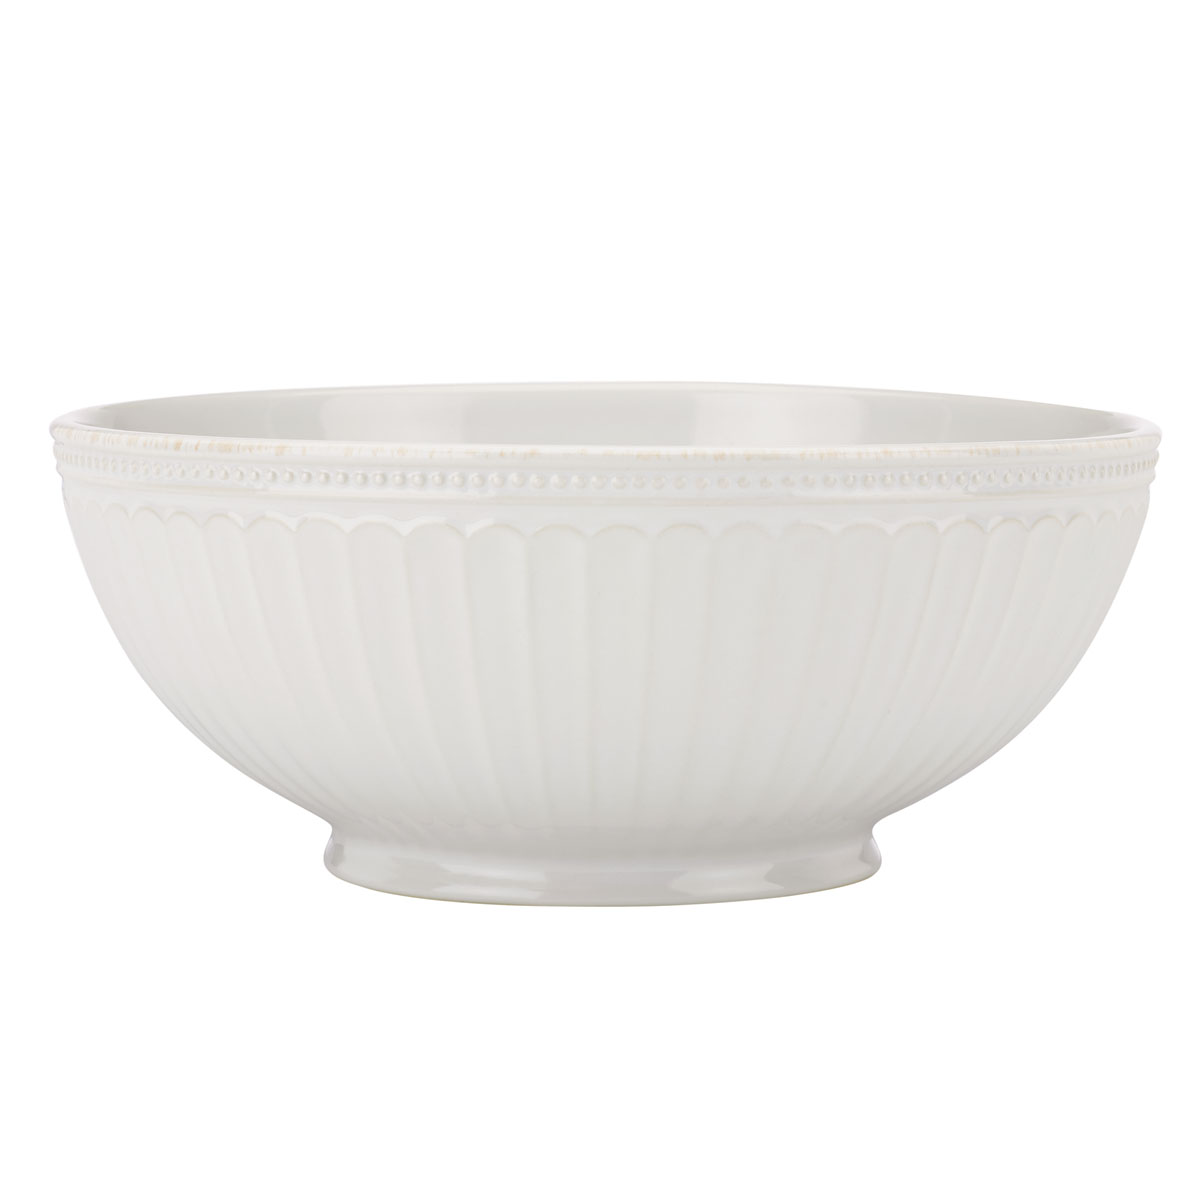 Lenox French Perle Groove White Dinnerware Serving Bowl